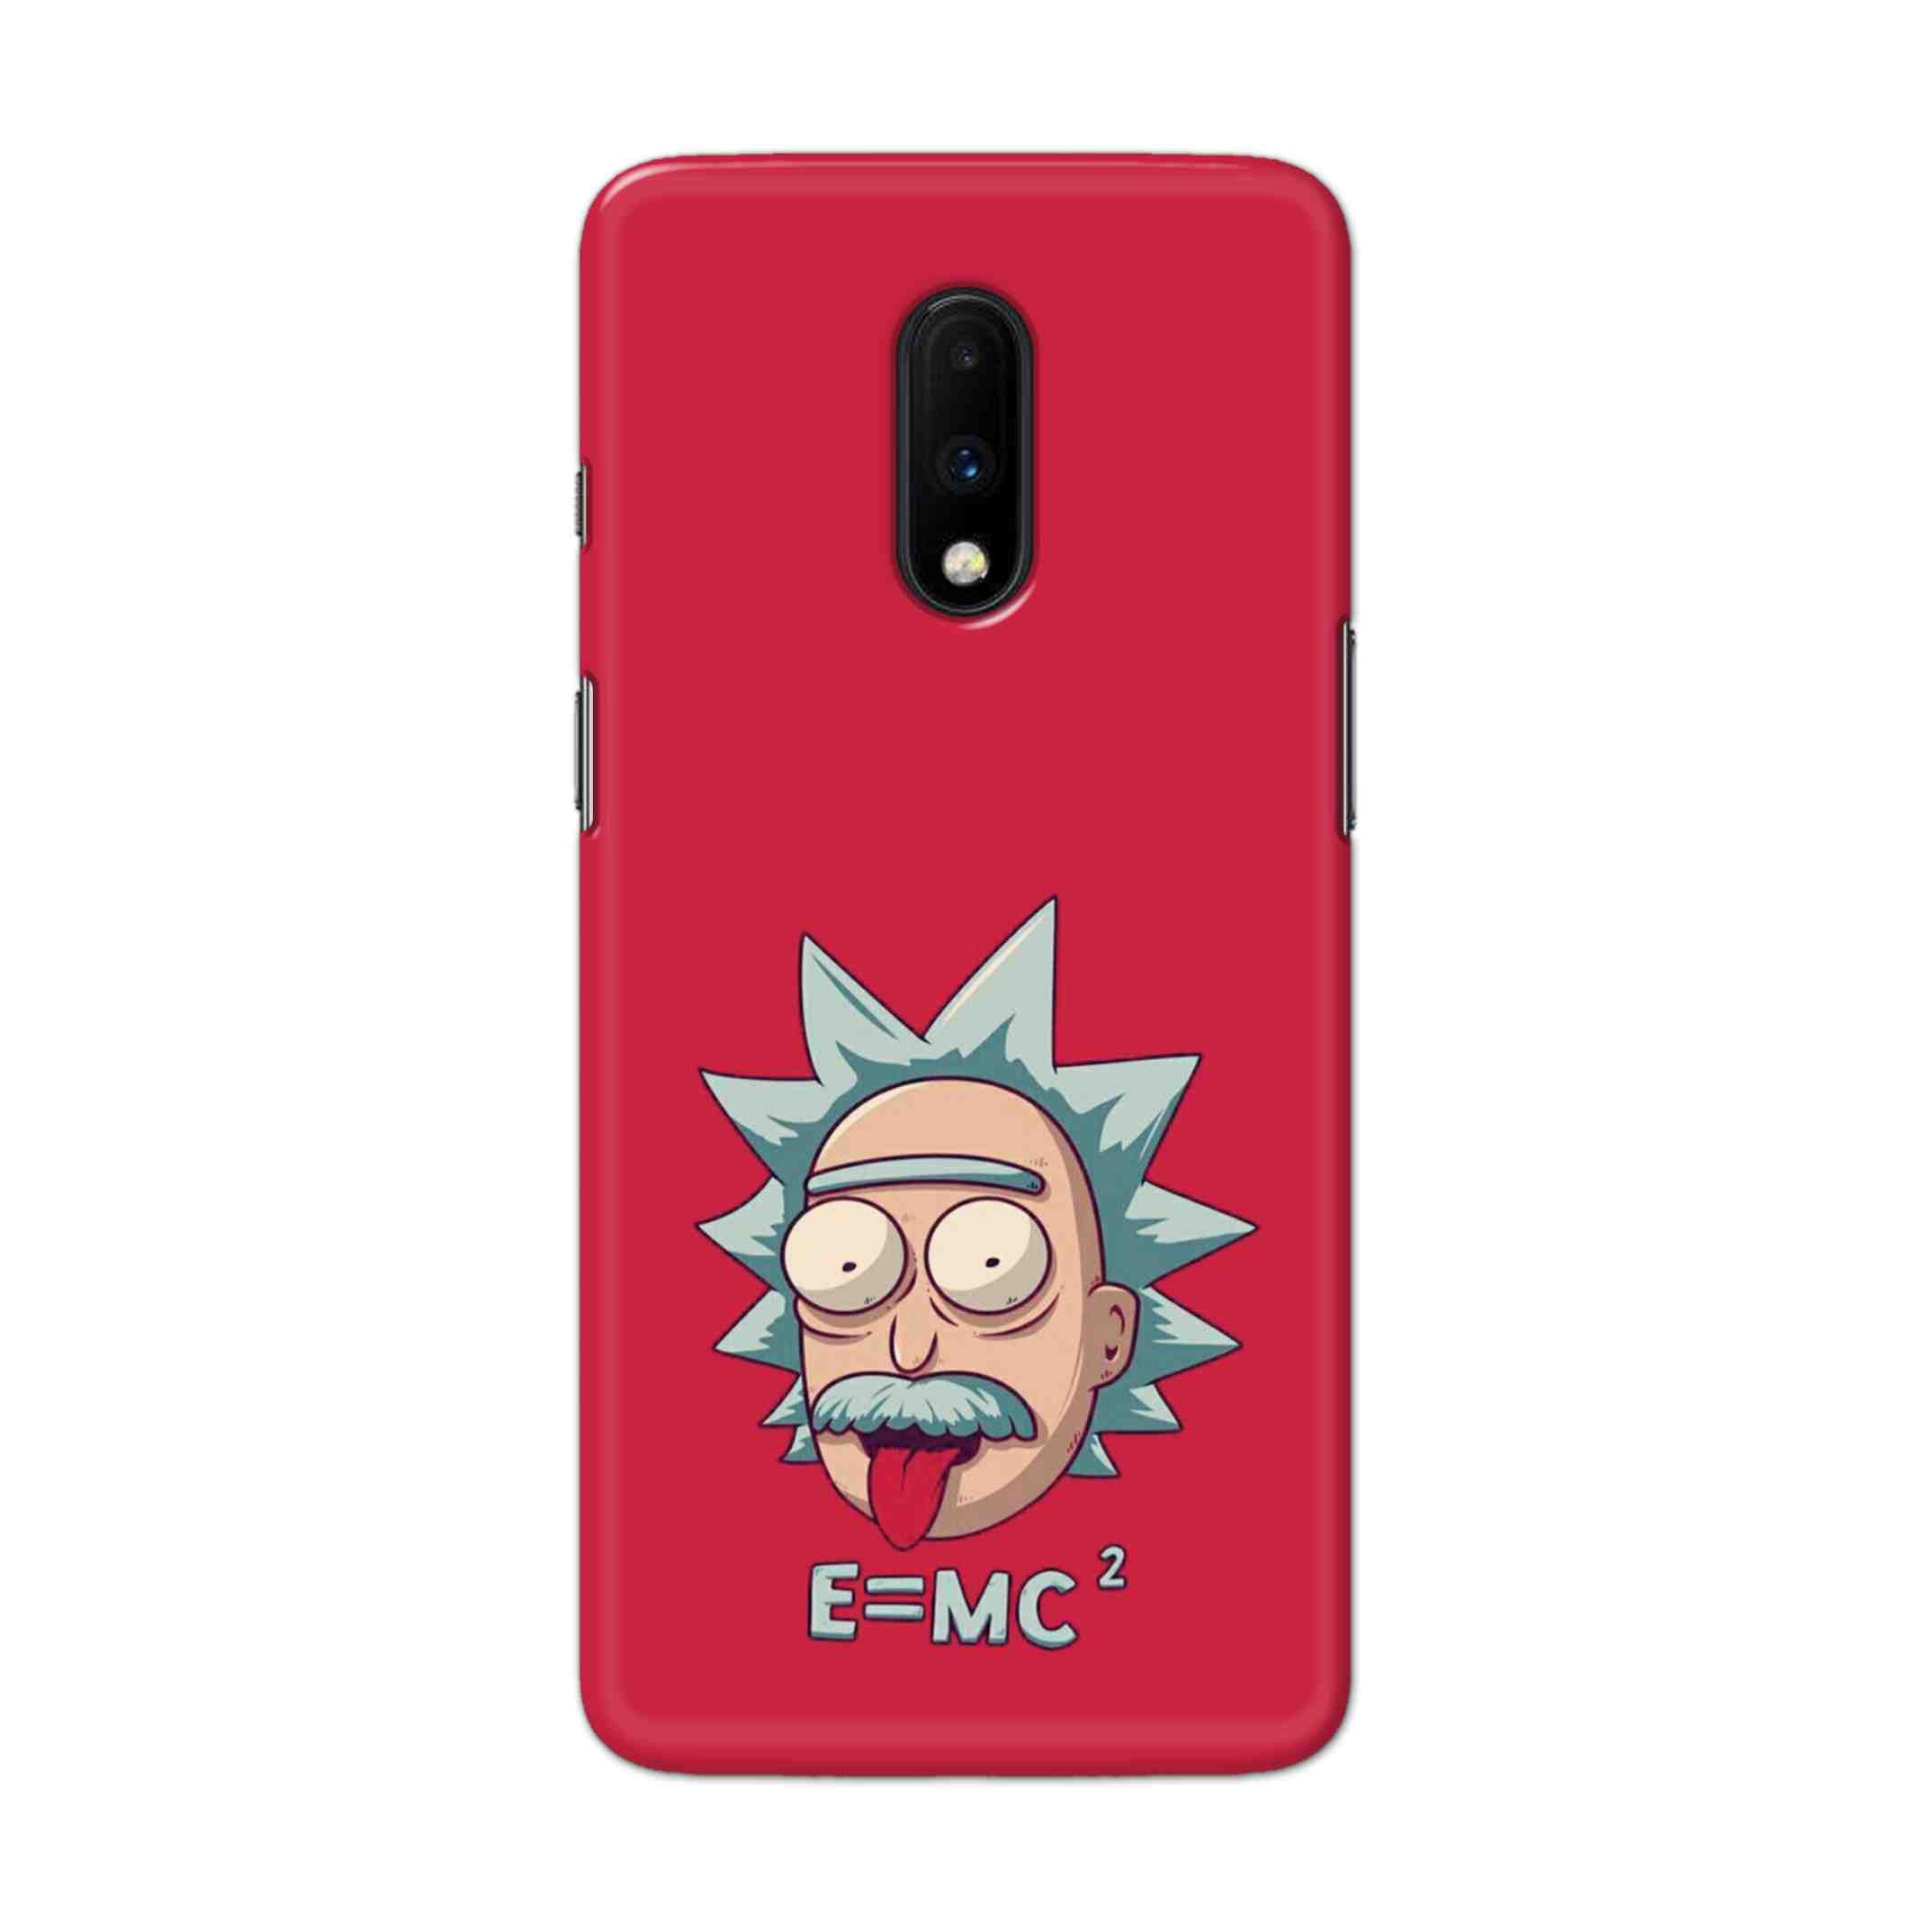 Buy E=Mc Hard Back Mobile Phone Case Cover For OnePlus 7 Online